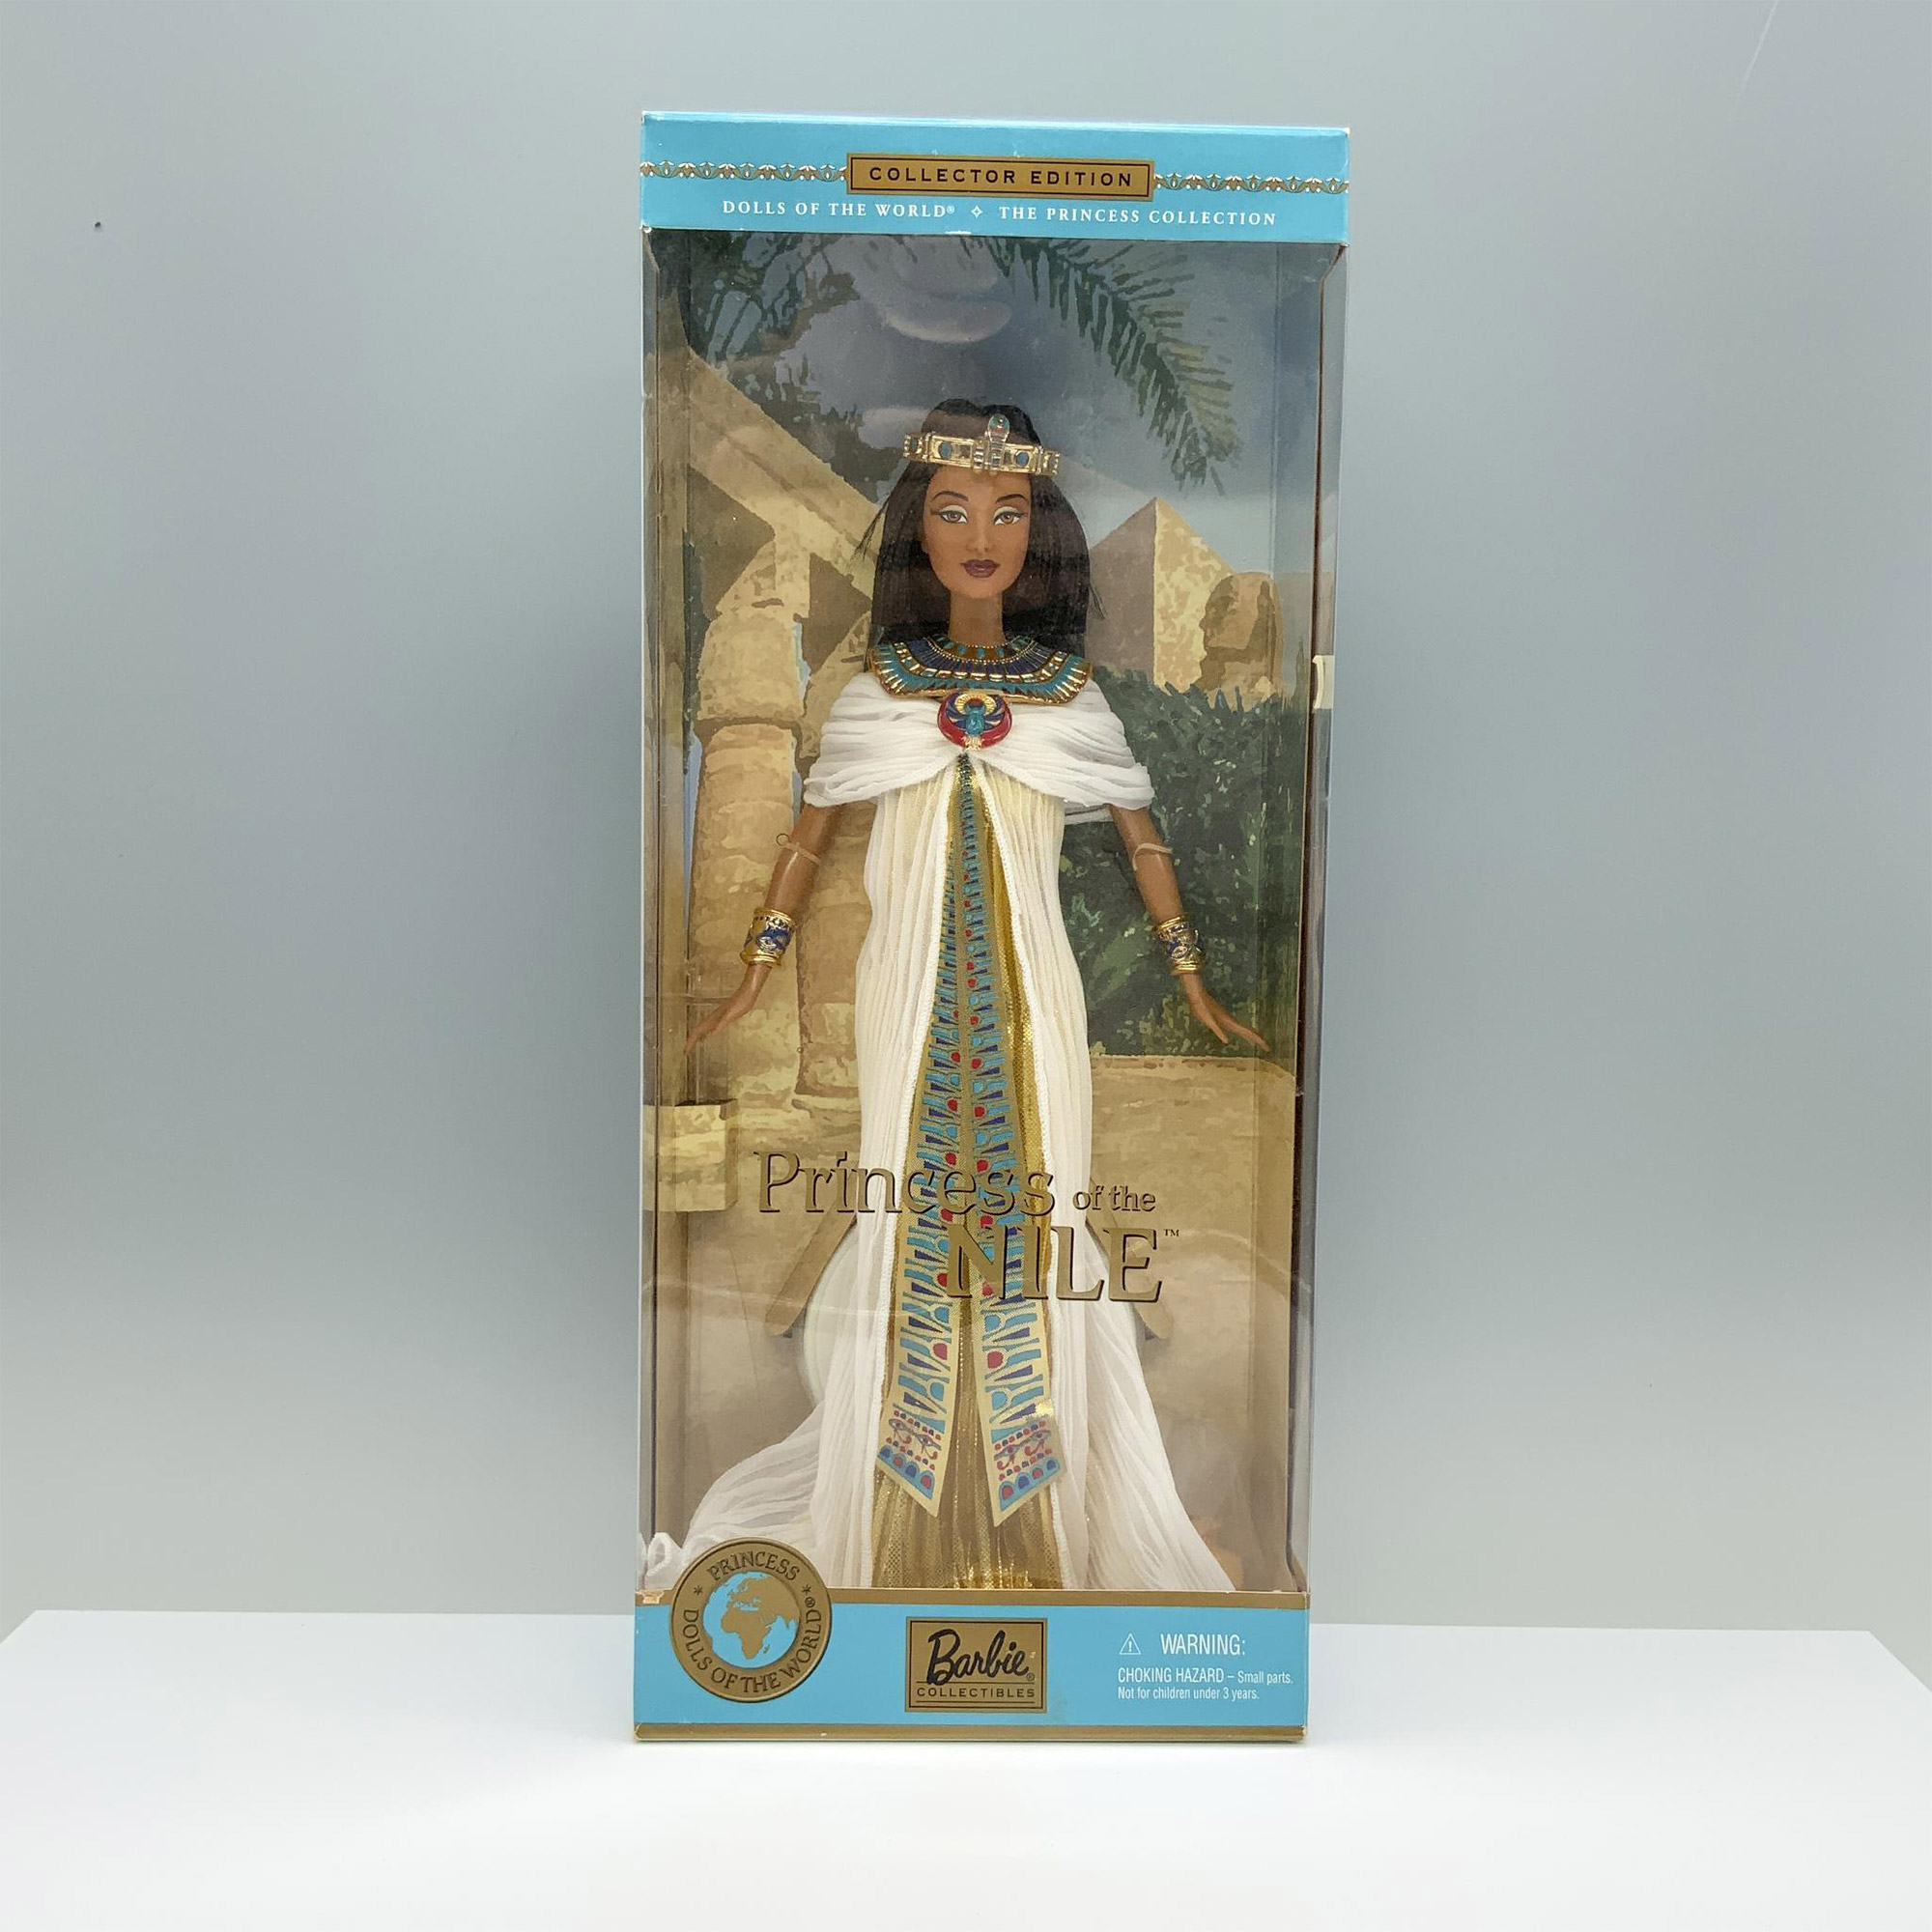 Mattel Dolls of the World Barbie, Princess of the Nile | Lion and